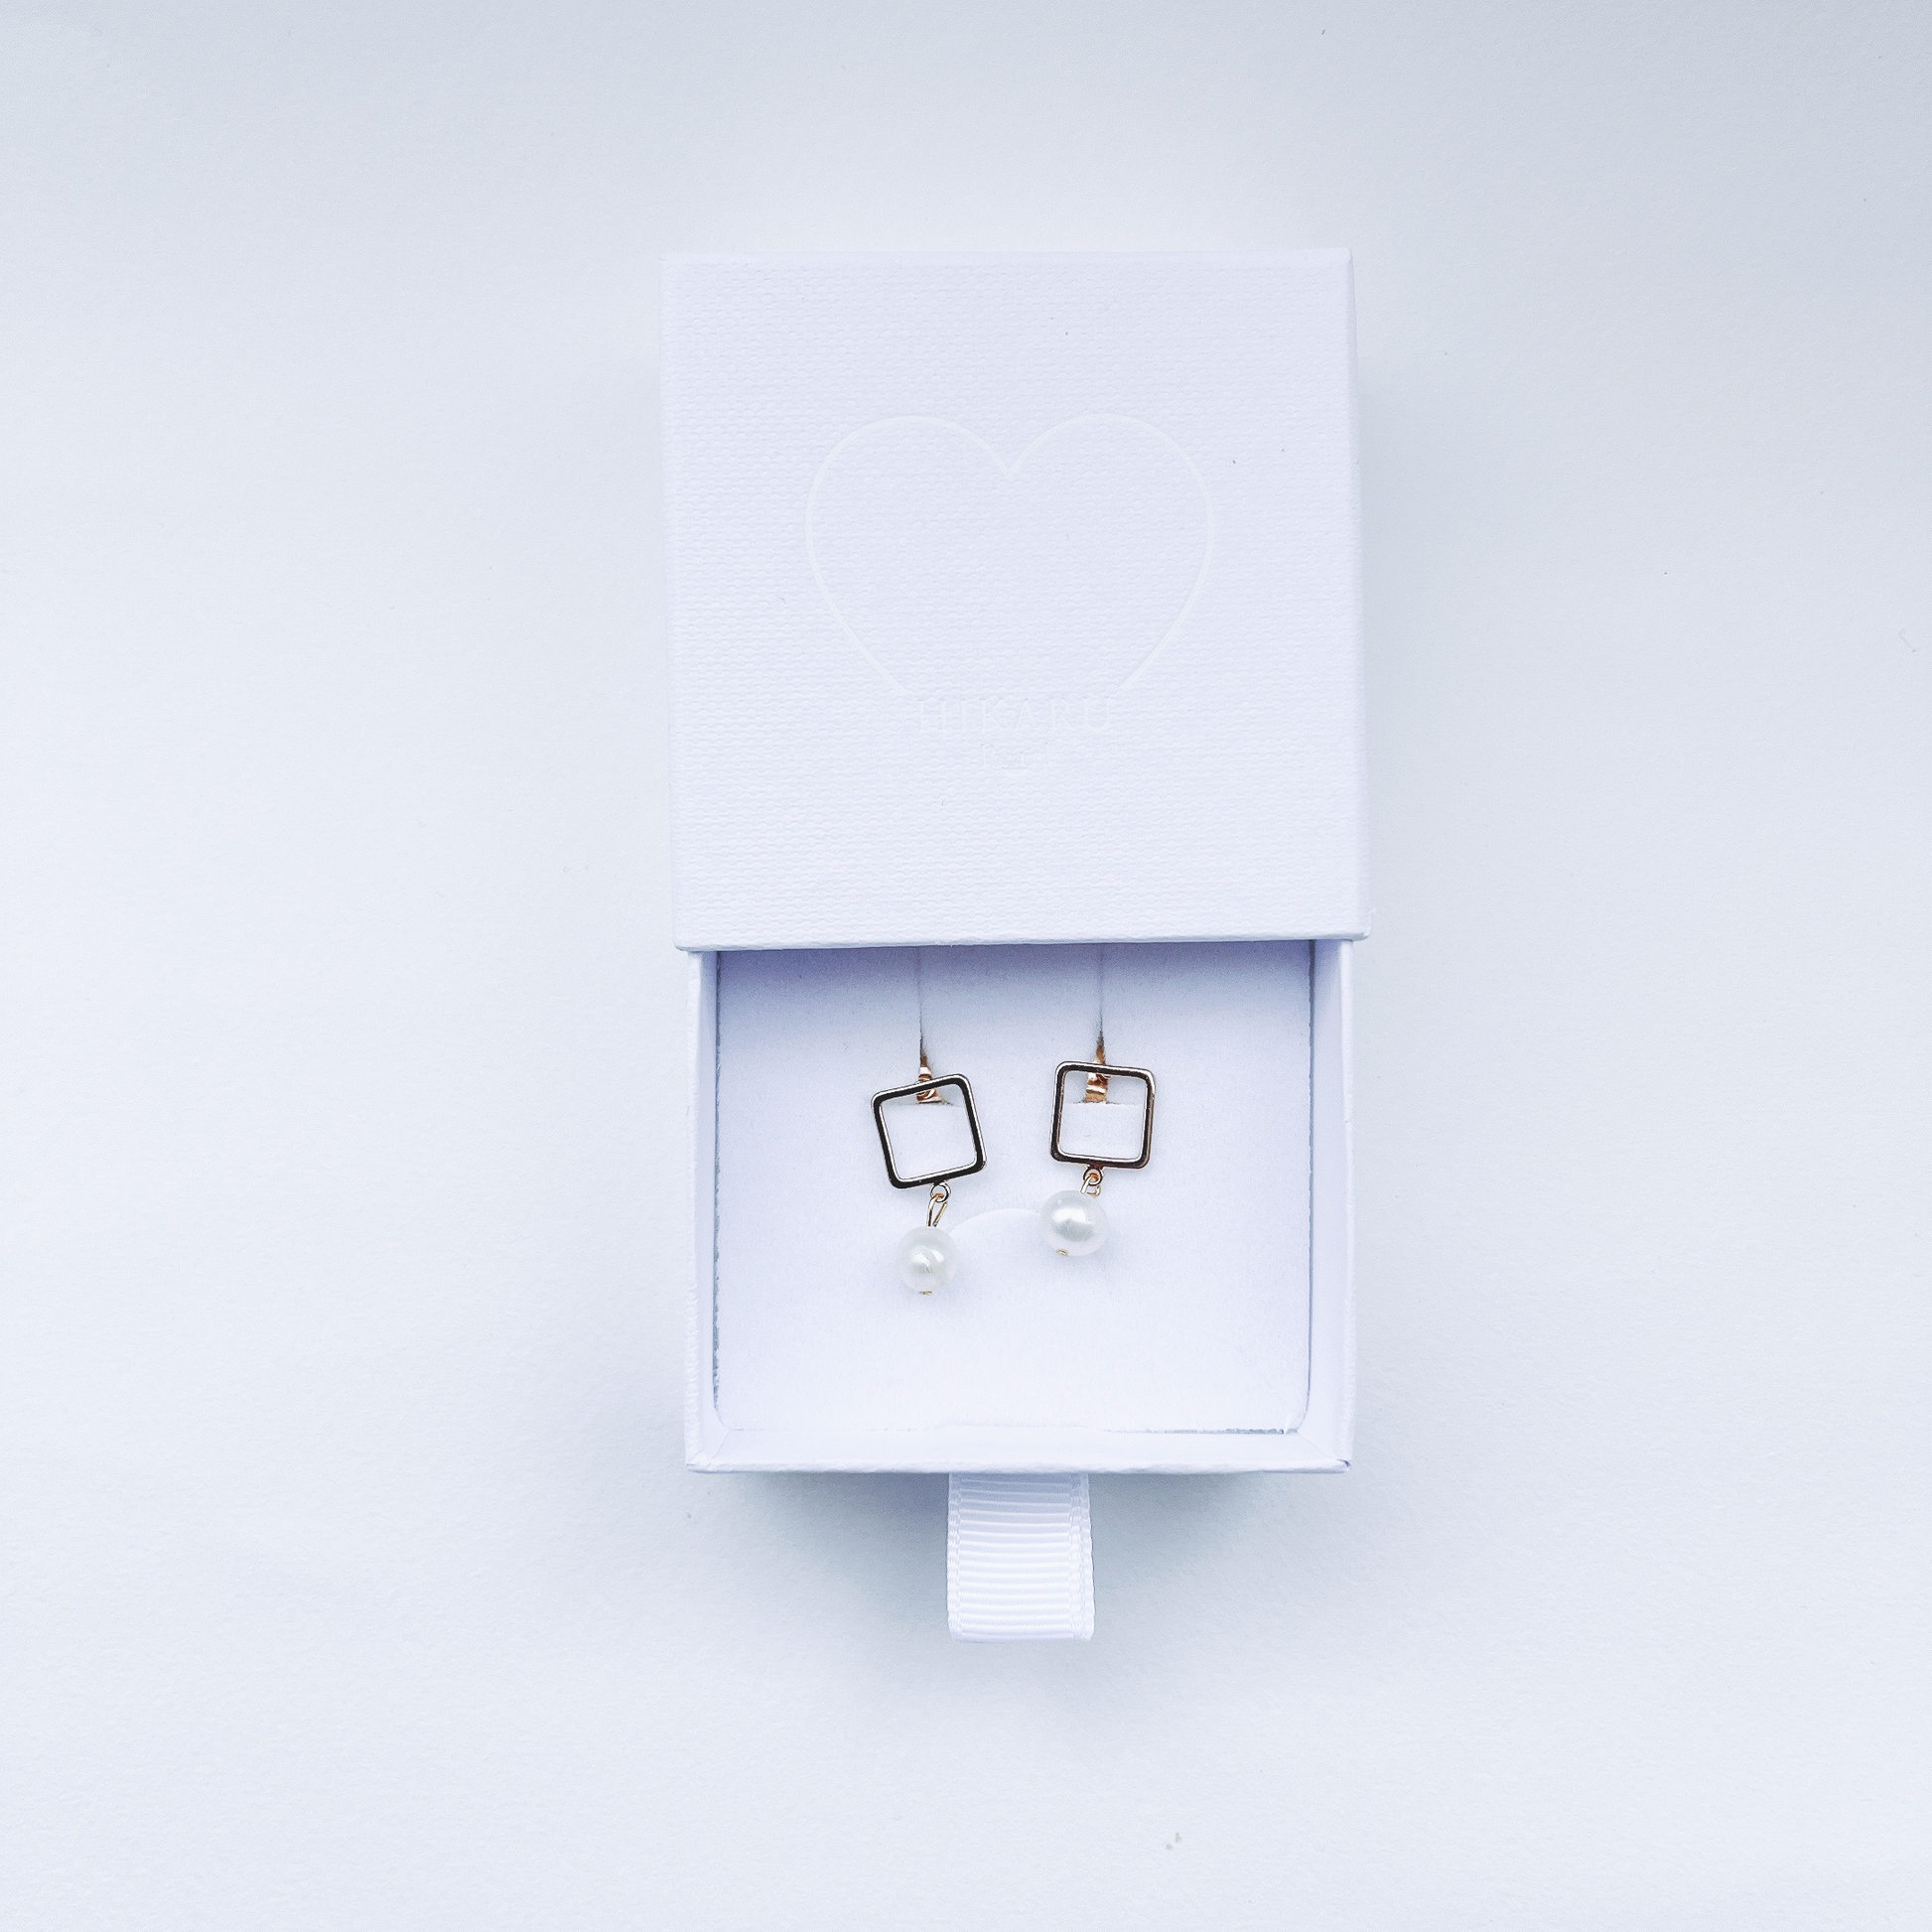 Tiny square contemporary, minimalistic earring by Hikaru Pearl